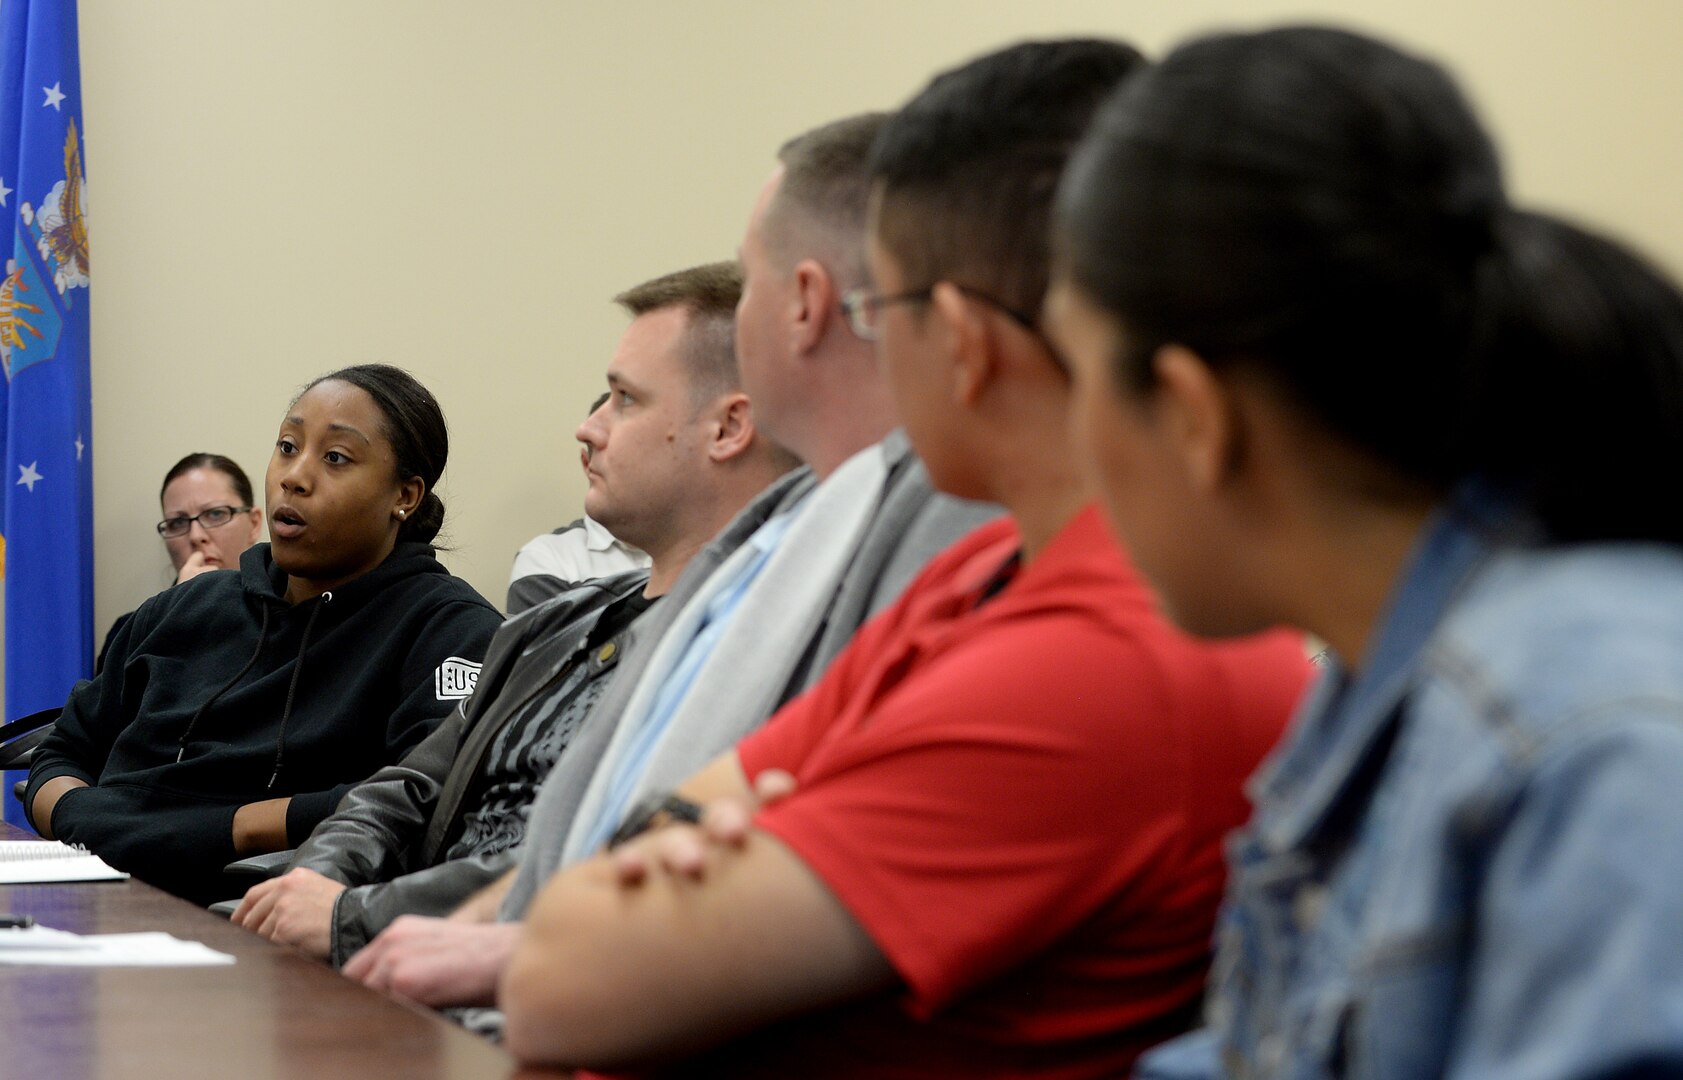 Staff Sgt. Amanda Harris, 346th Test Squadron commander’s support staff NCO in charge, shares her personal leadership philosophy during an Airpower Leadership Academy session, Feb. 15, 2018, at Joint Base San Antonio-Lackland, Texas. ALA provided 11 staff and technical sergeants the opportunity to learn from nine senior noncommissioned officers in order to develop their personal leadership philosophy. (U.S. Air Force photo by Tech. Sgt. R.J. Biermann)